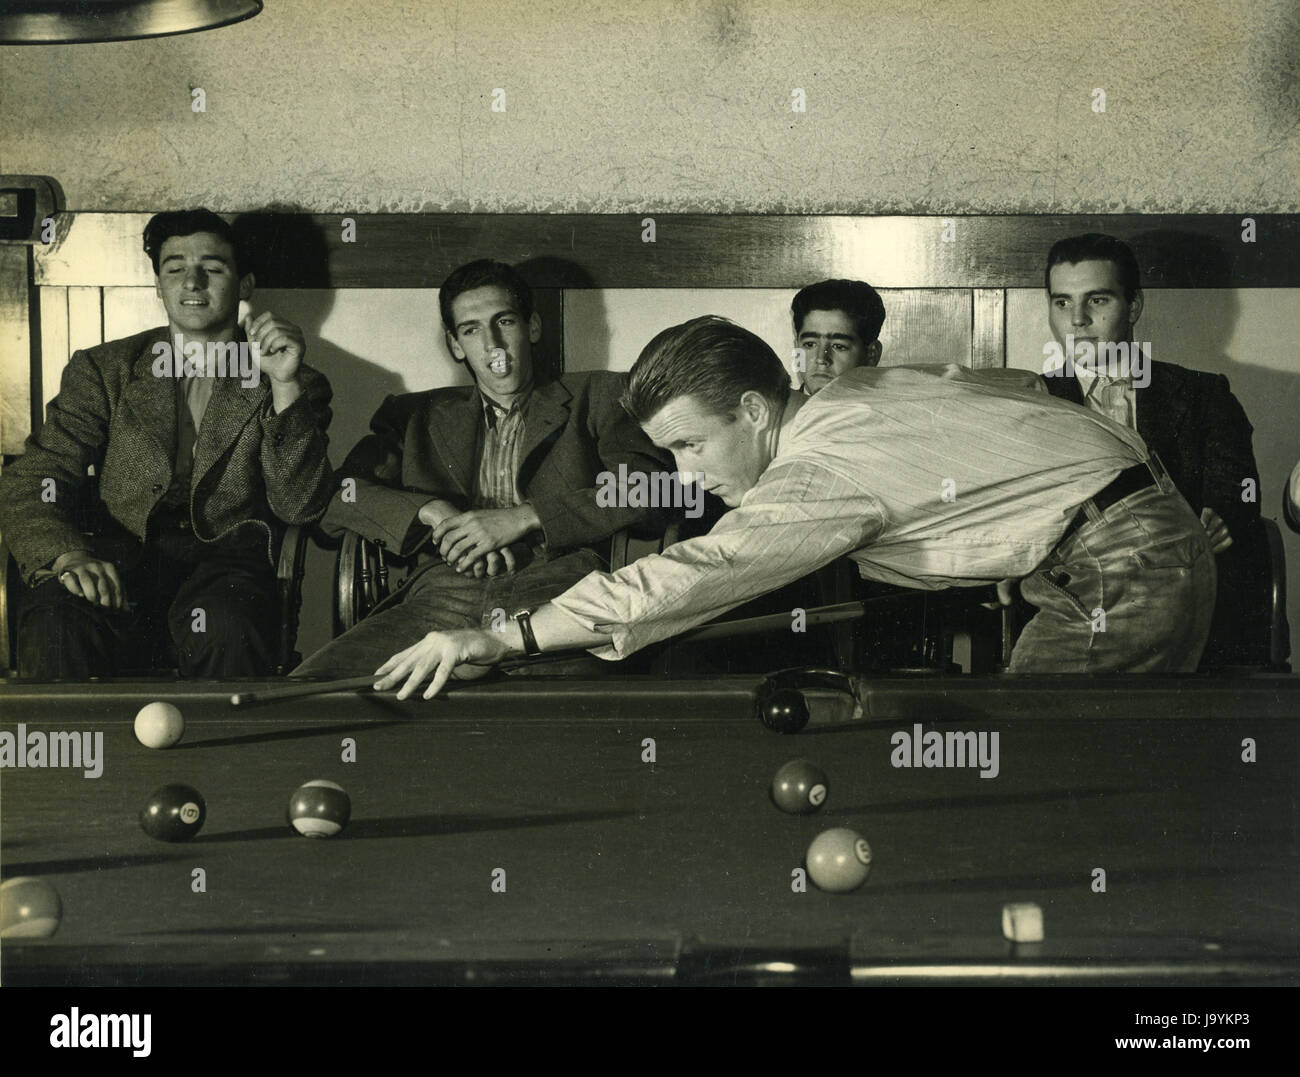 Hayward, California, April 20, 1940 - Young men loafing in the pool hall on a Saturday afternoon. Stock Photo